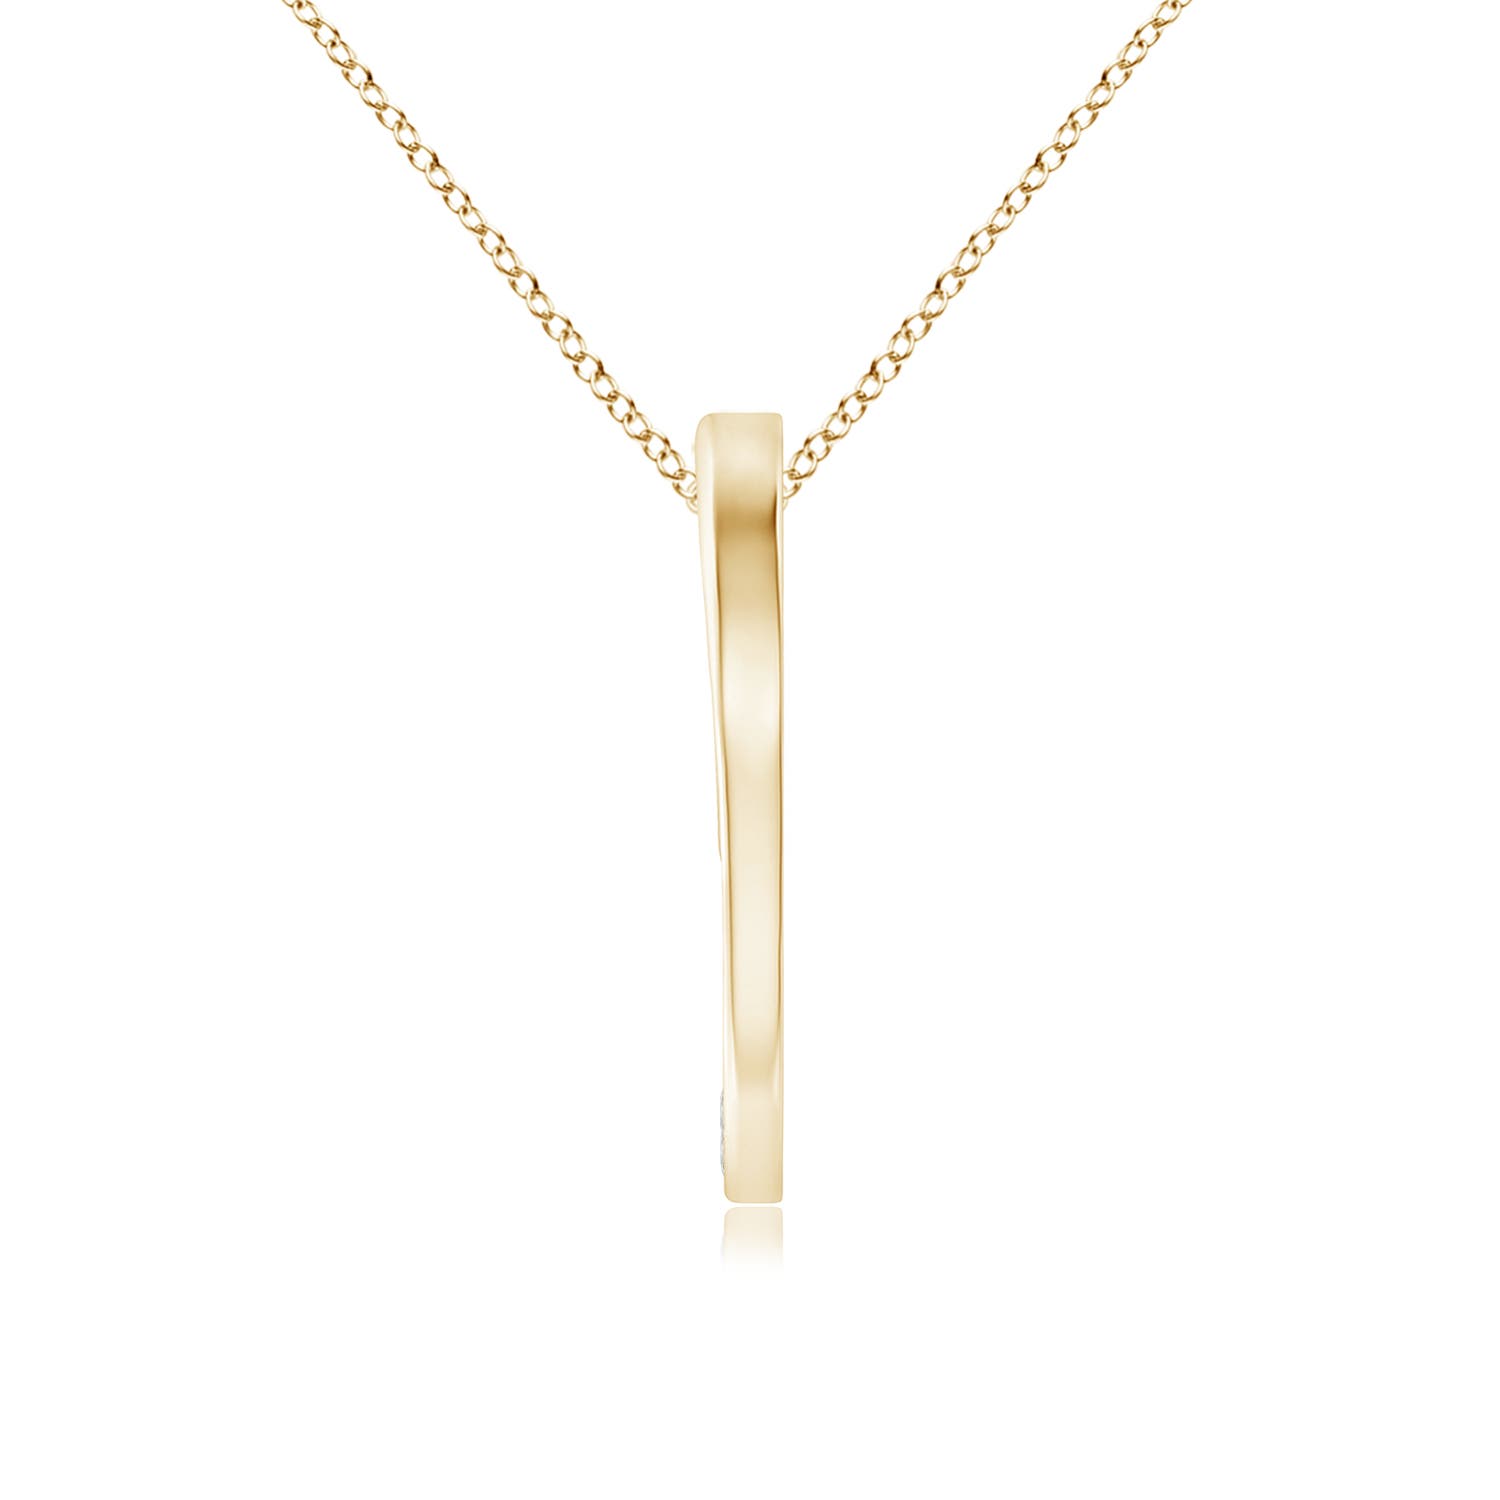 H, SI2 / 0.23 CT / 14 KT Yellow Gold